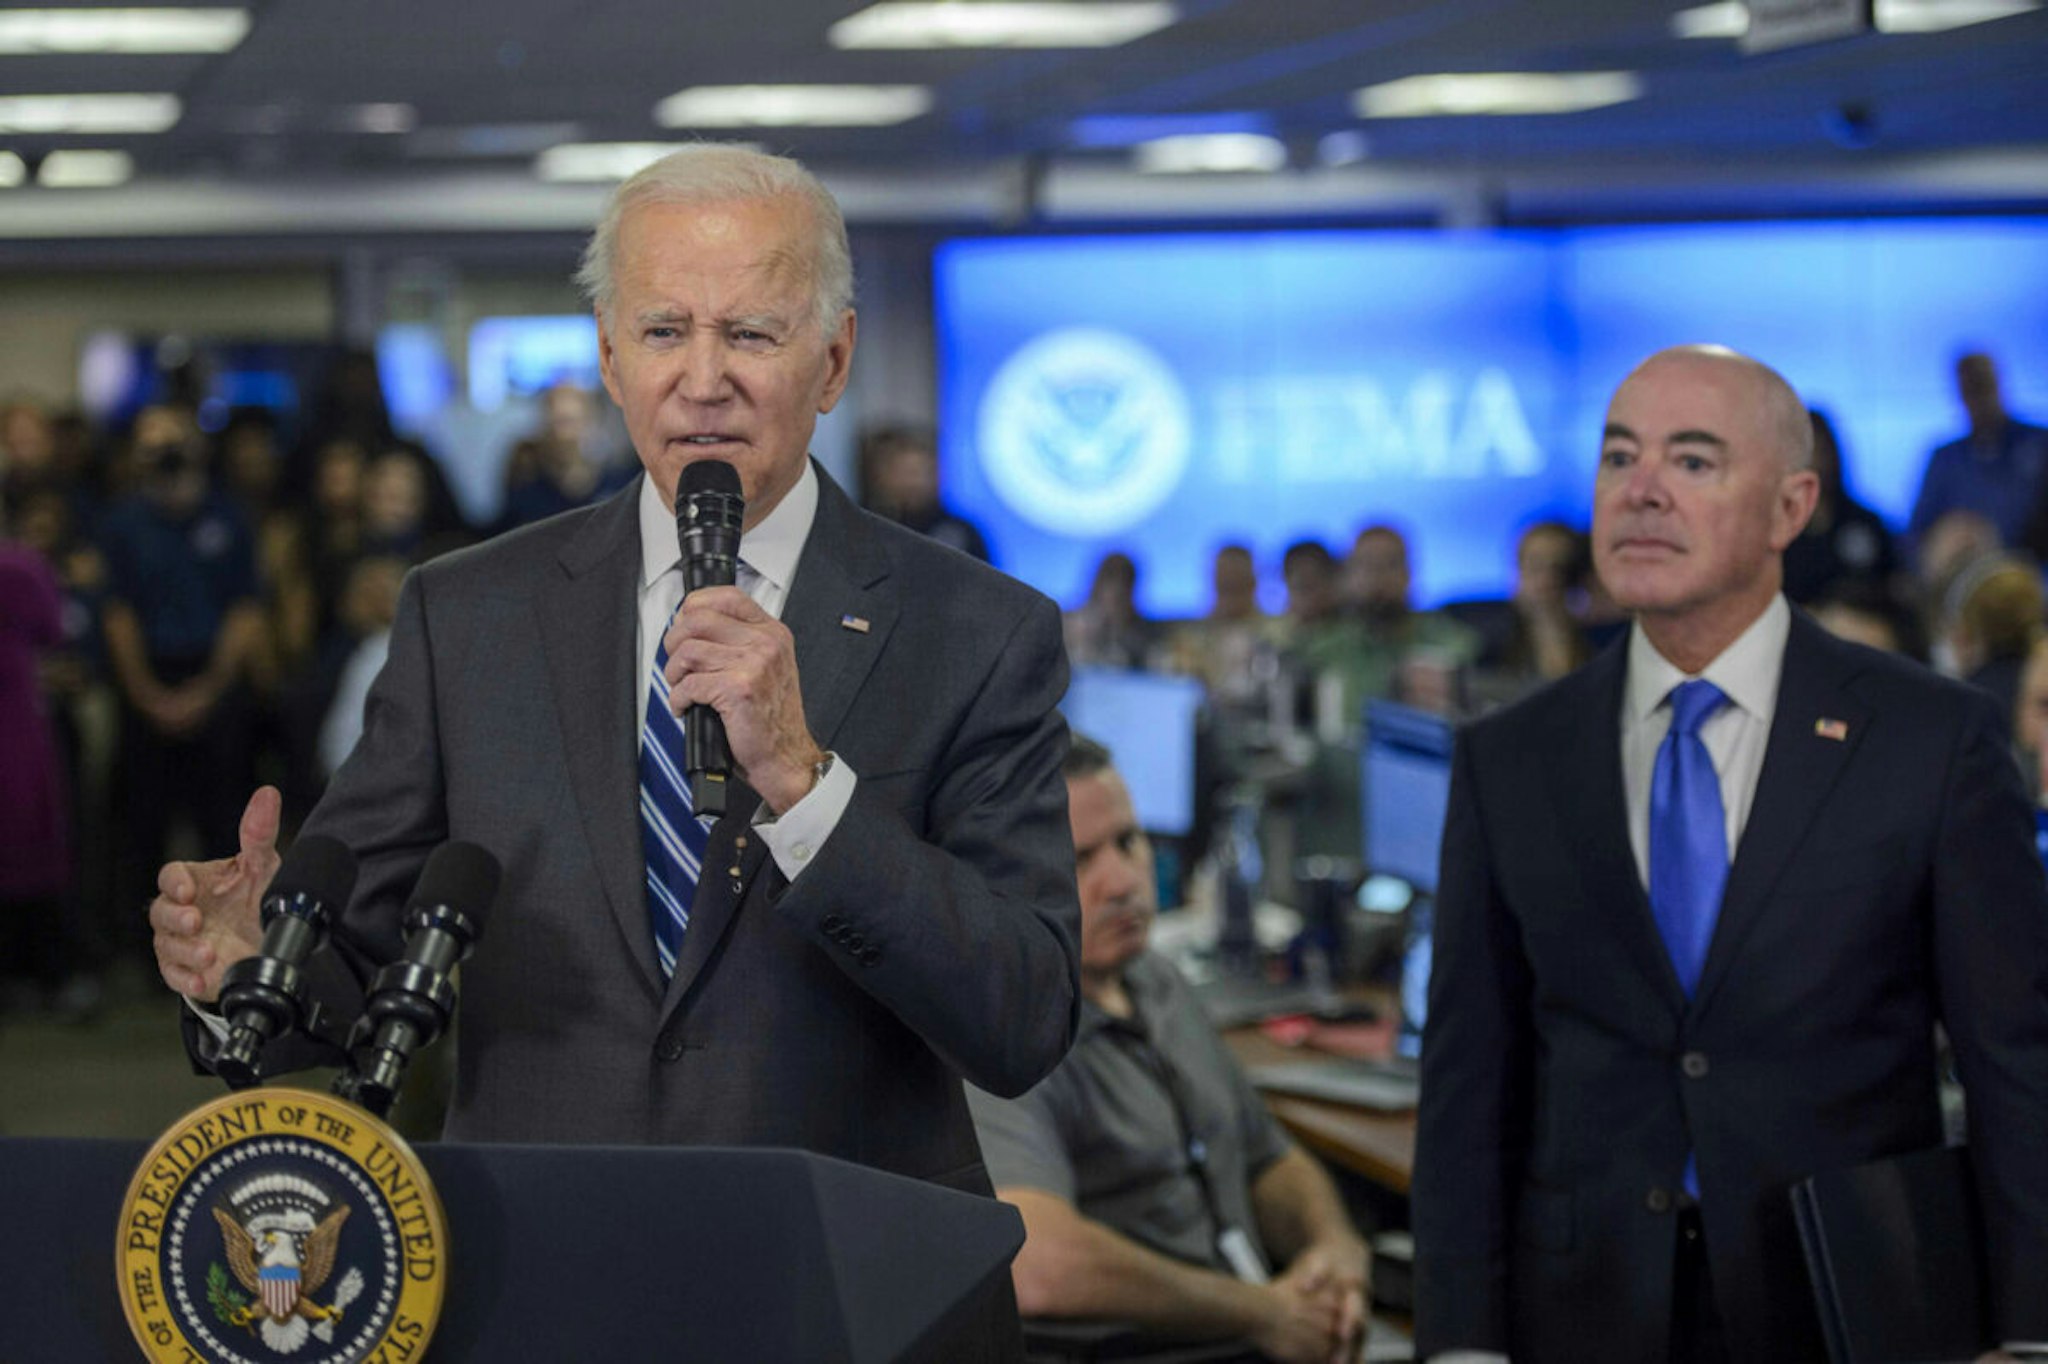 US President Joe Biden speaks beside Alejandro Mayorkas, secretary of the US Department of Homeland Security (DHS), at the Federal Emergency Management Agency (FEMA) headquarters in Washington, DC, US, on Thursday, Sept. 29, 2022. Biden and his administration began today to contend with Hurricane Ian, a storm poised to rank among the nation's costliest natural disasters after devastating southwest Florida.